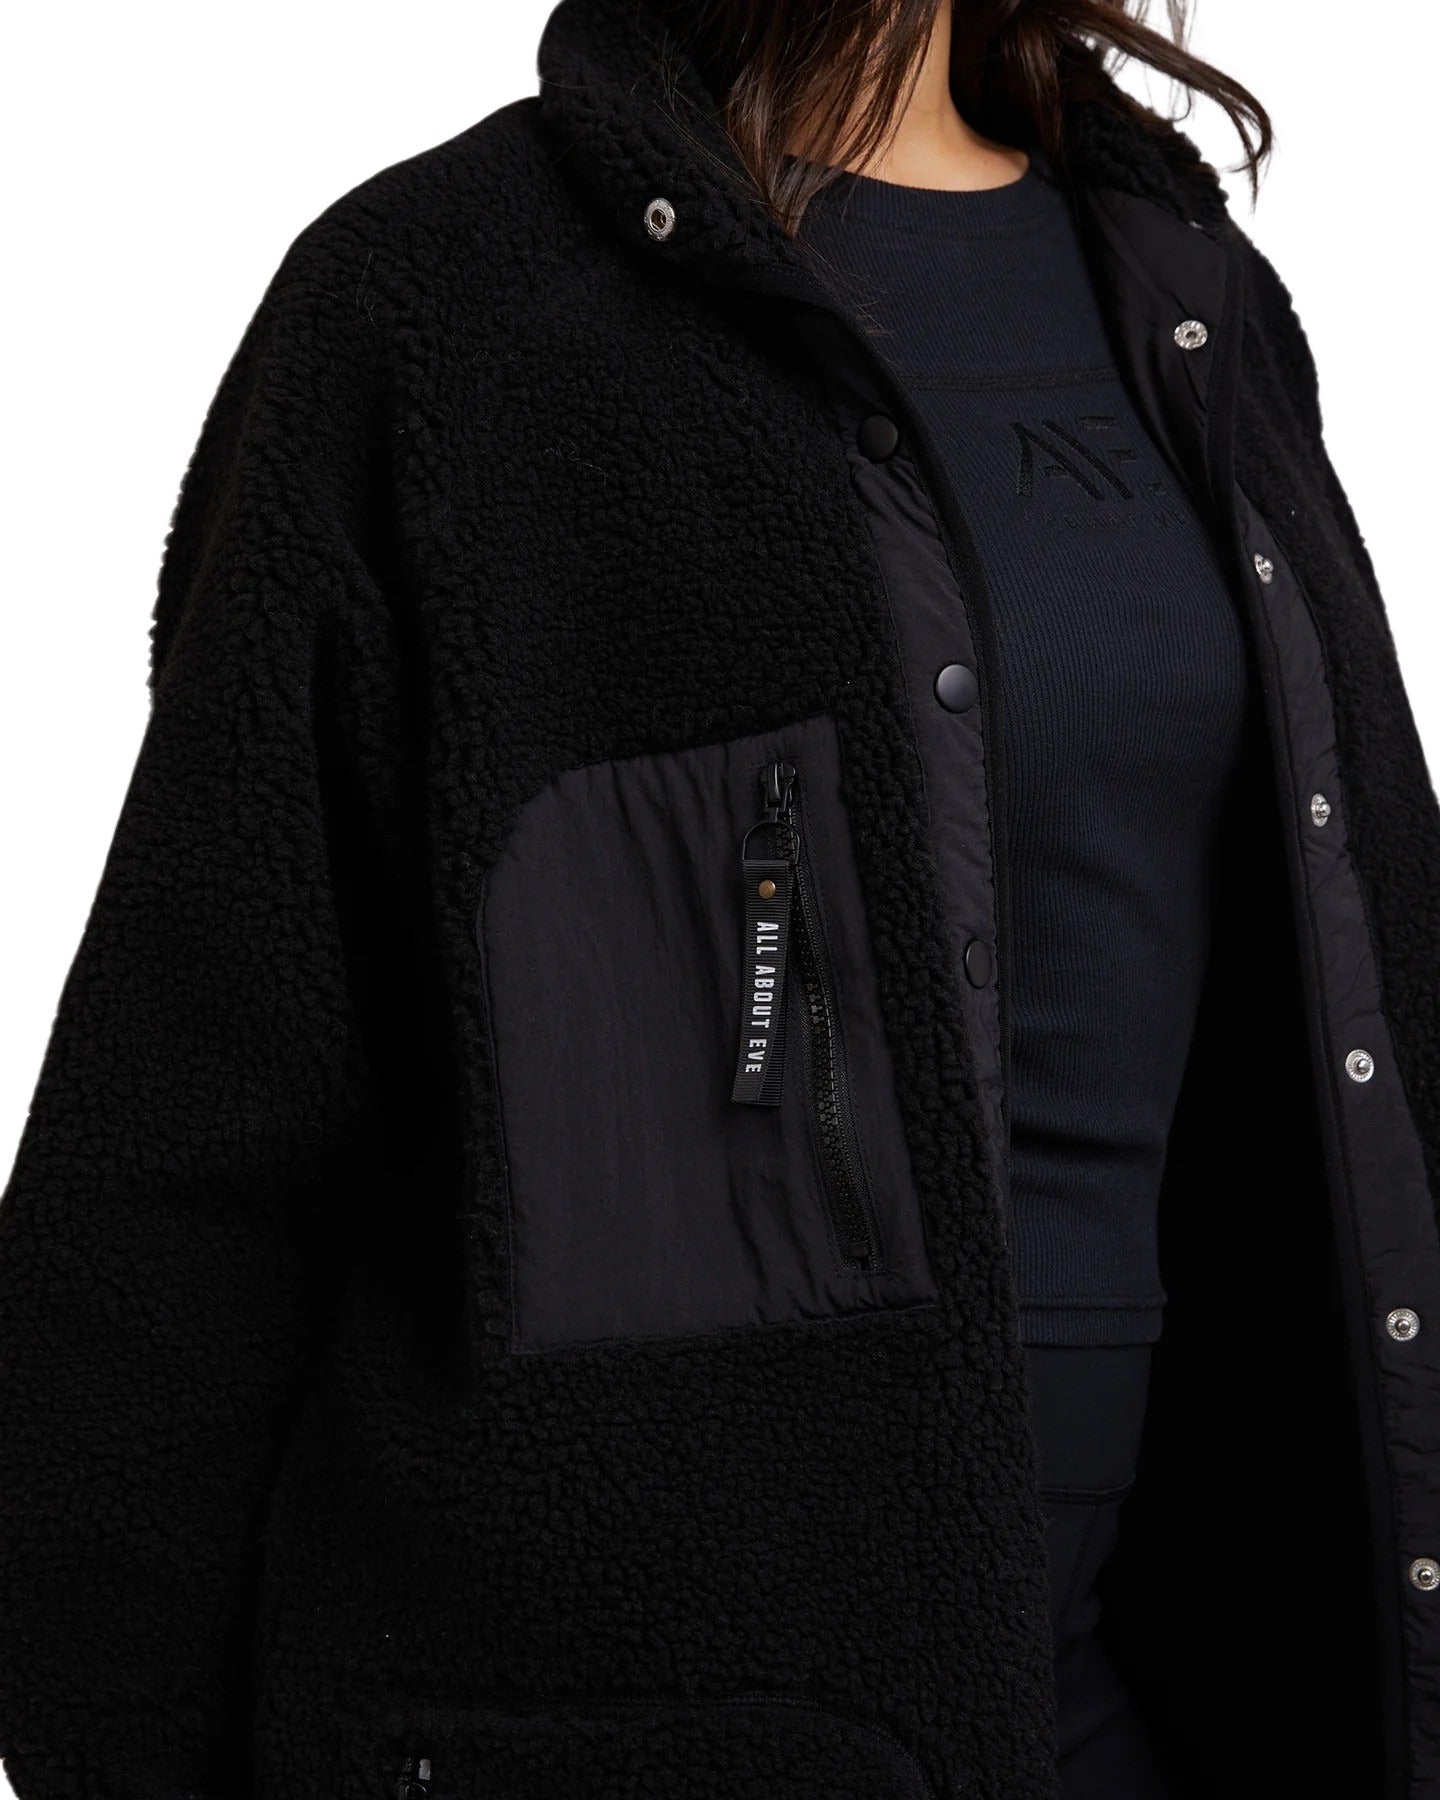 All About Eve - AAE Active Teddy Longline Jacket - Black